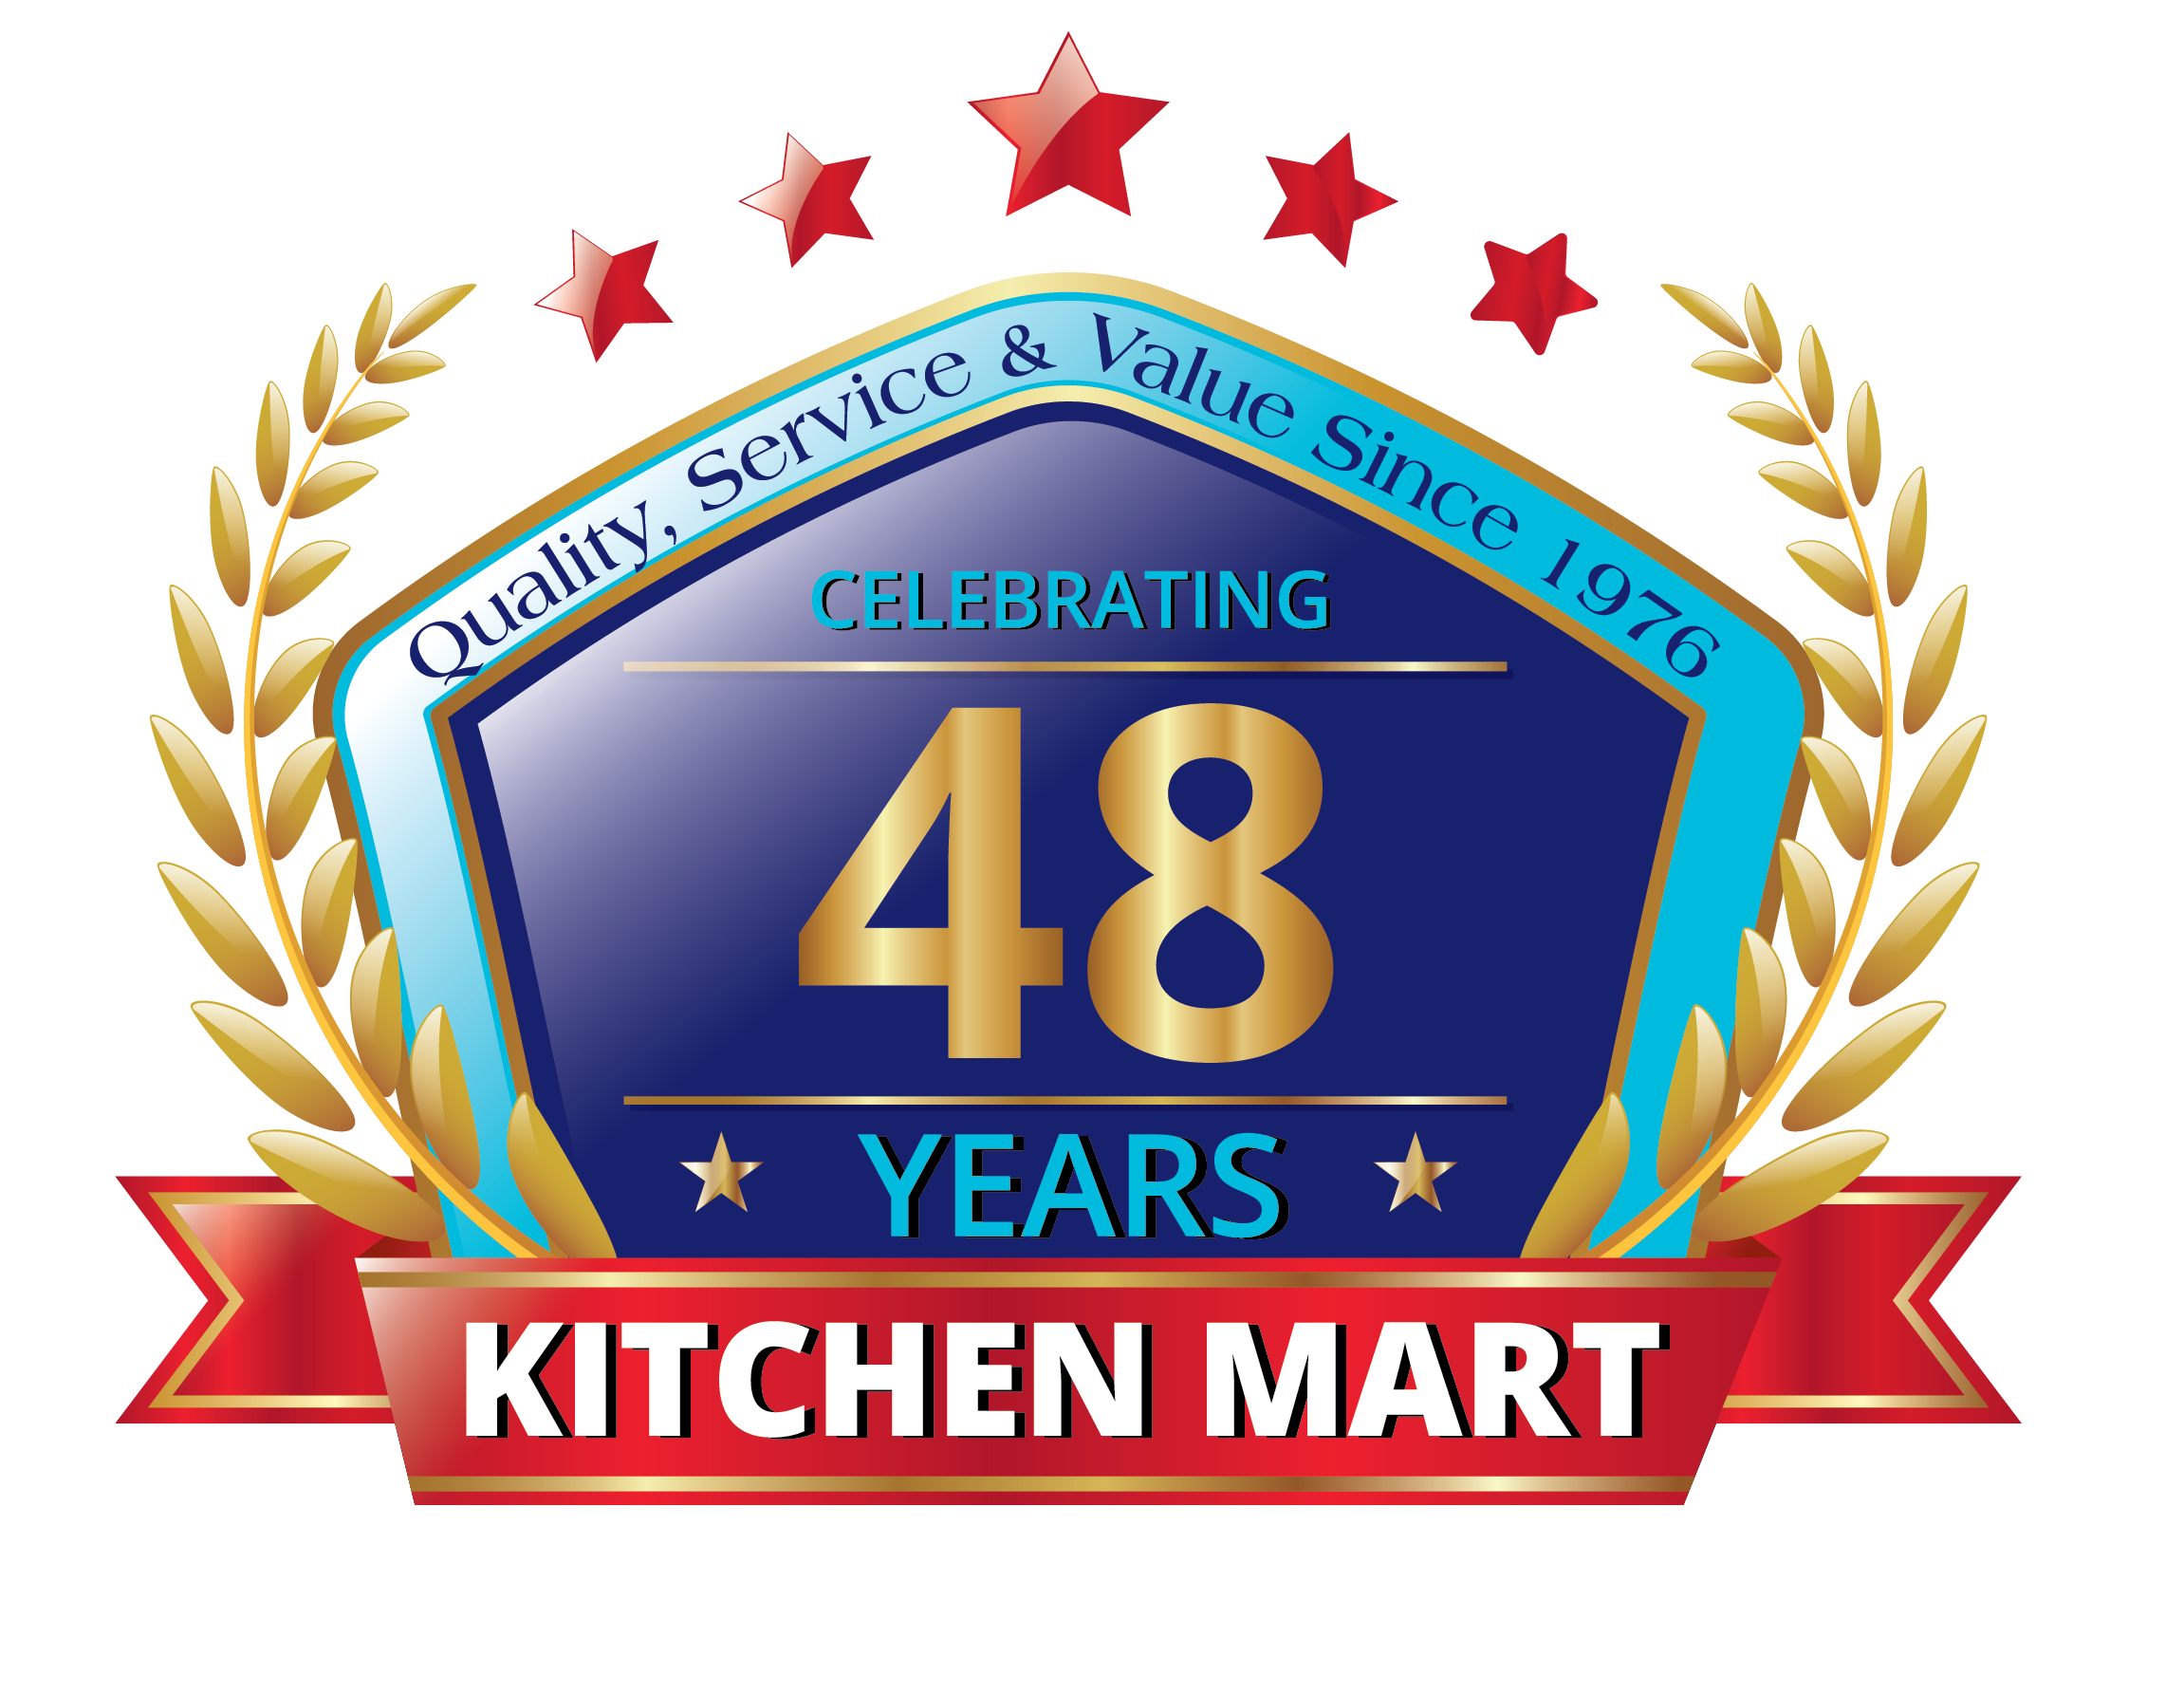 KitchenMart 46 Years of Quality, Service, & Value Logo